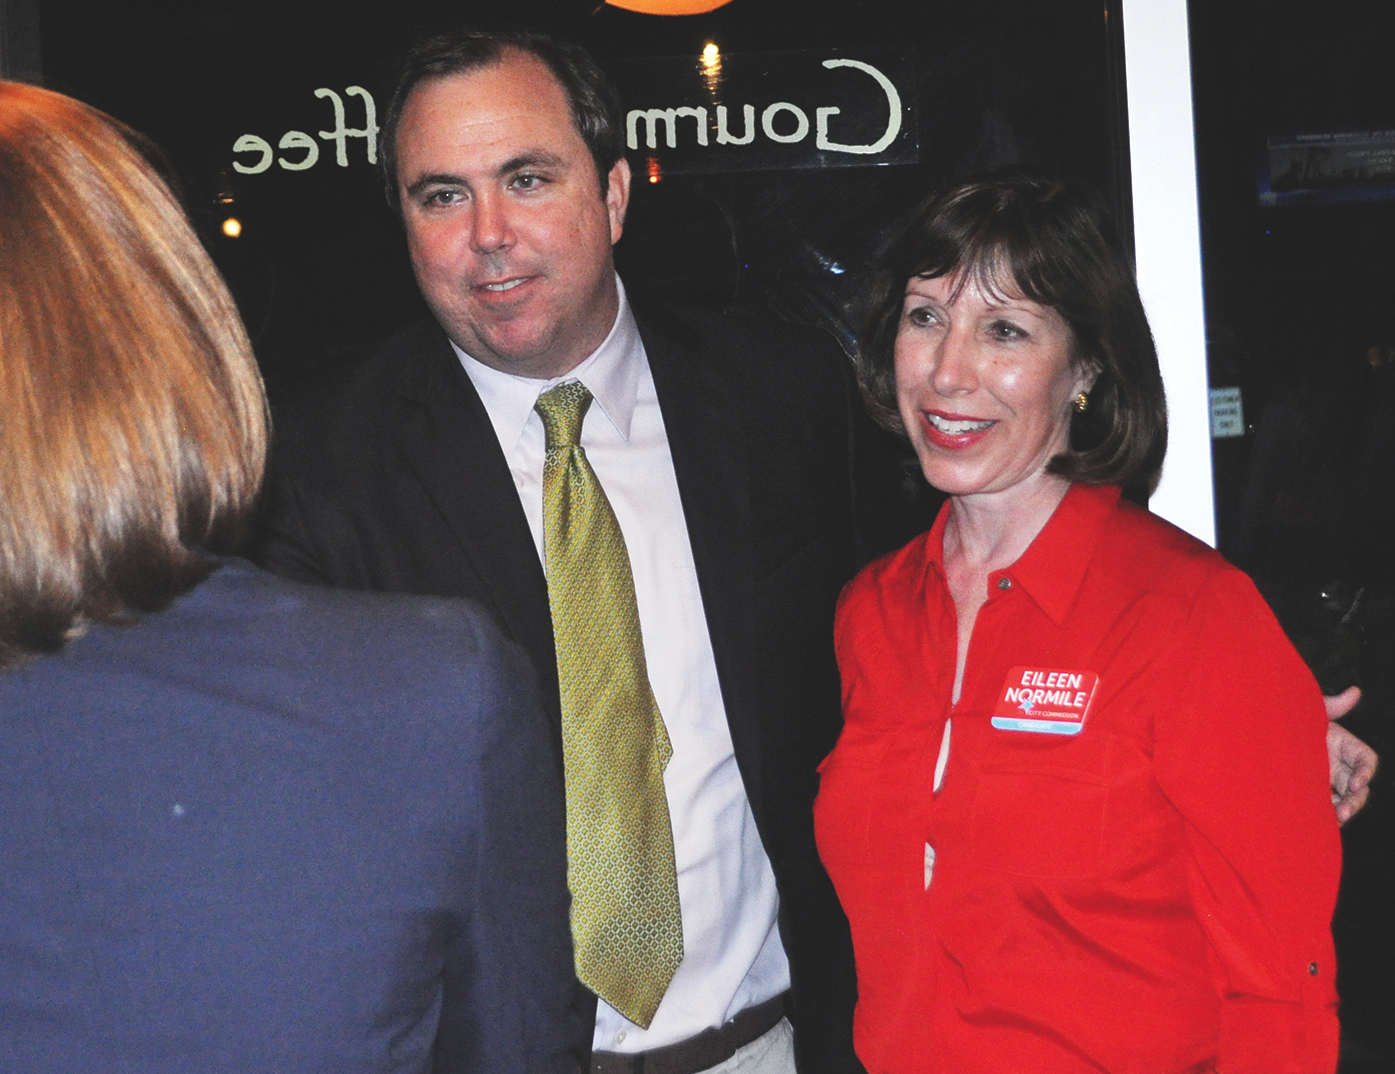 Sarasota GOP Chairman Joe Gruters and Sarasota City Commissioner Eileen Normile chat following Tuesday’s election.